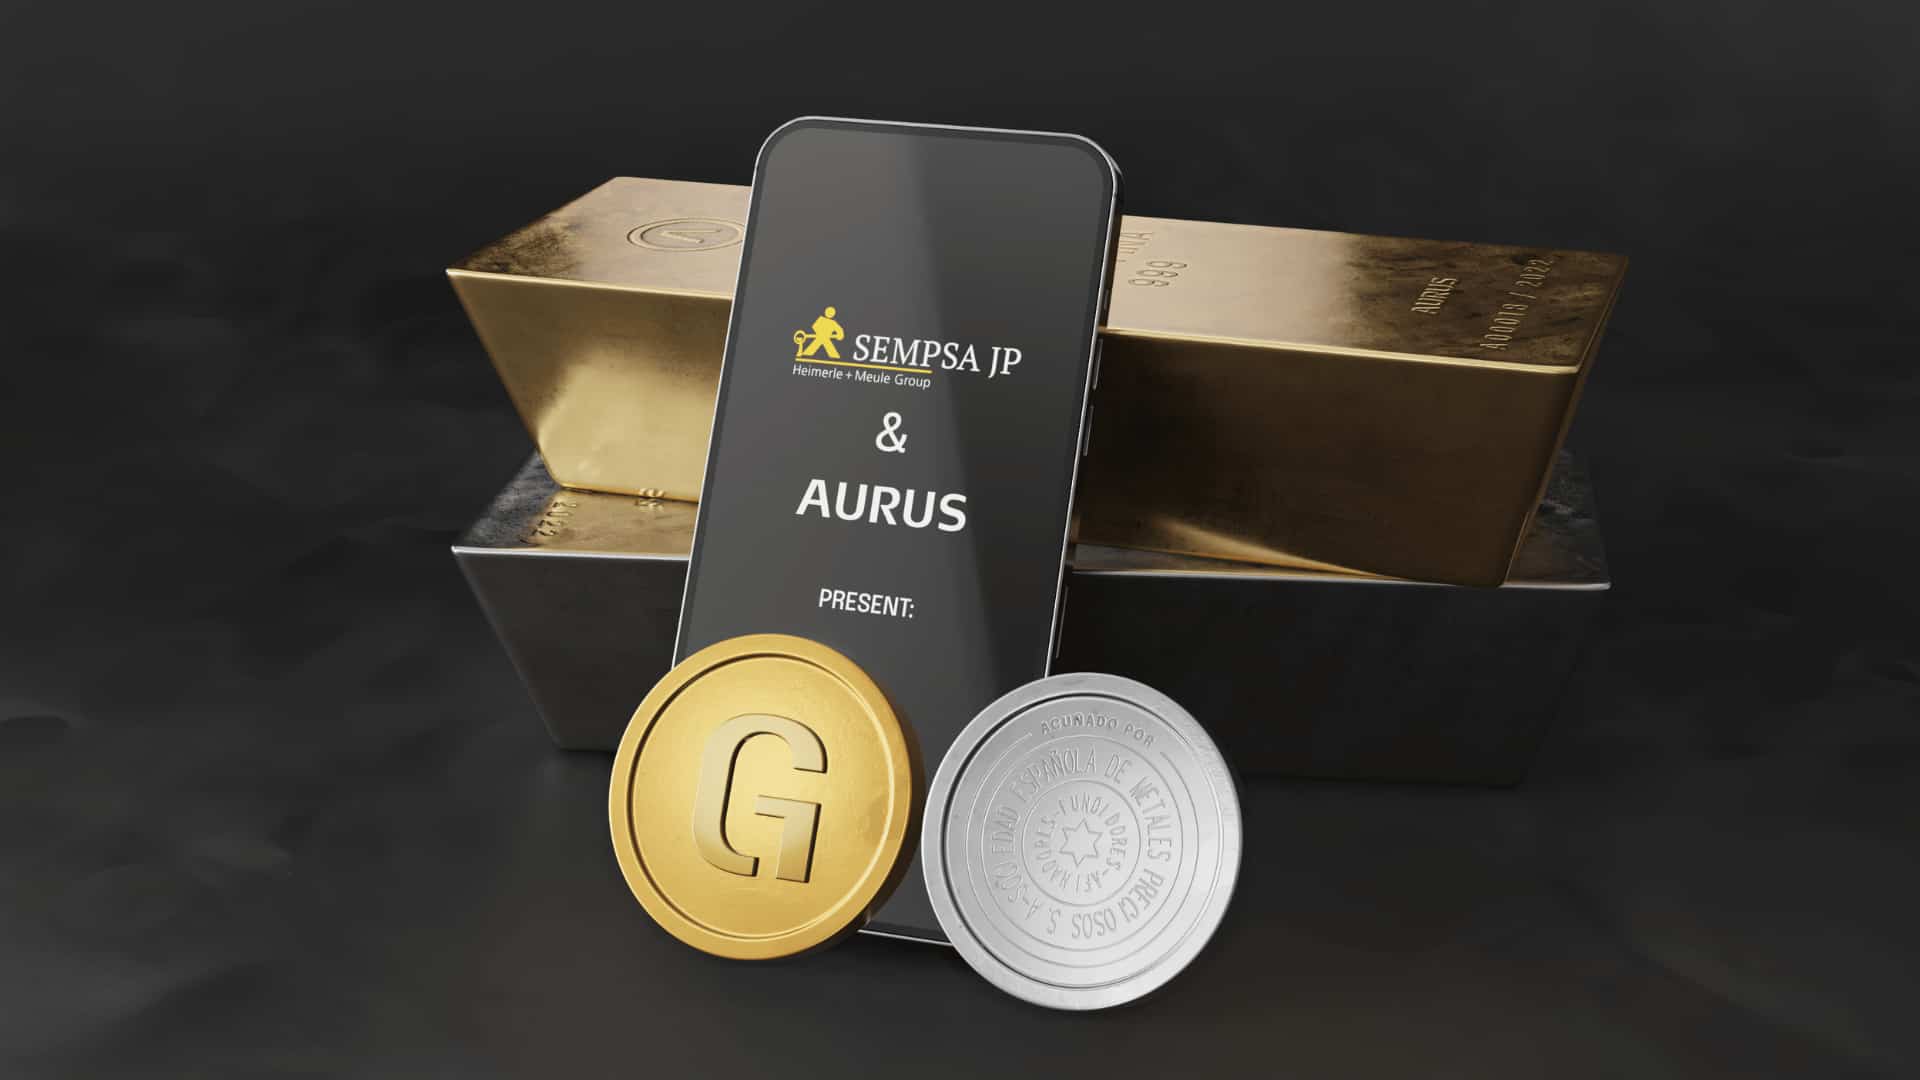 Sempsa-jp,-lbma-good-delivery-refinery-launches-tokenized-gold-and-silver-on-the-blockchain-with-aurus